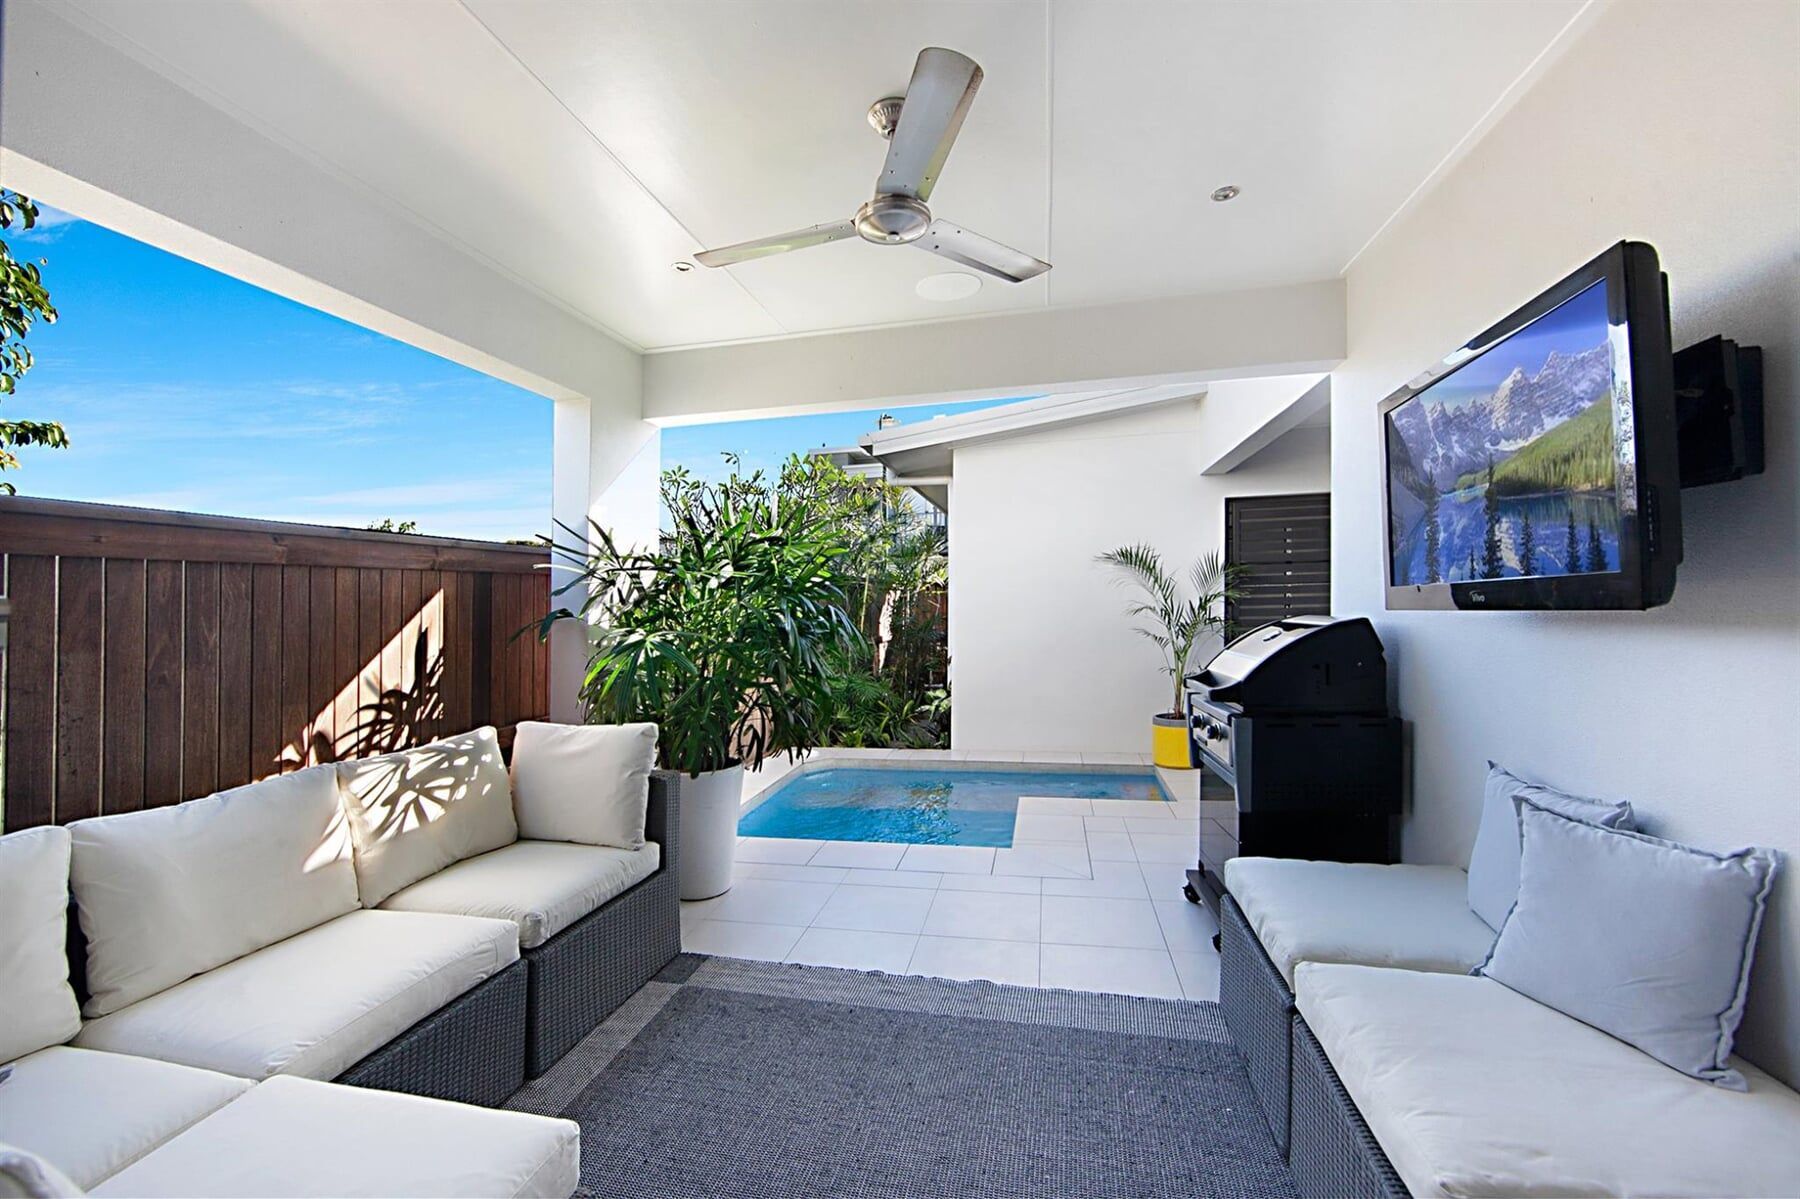 TV Outdoor Area with a Small Spa — Swimming Pools And Spas in Townsville, QLD